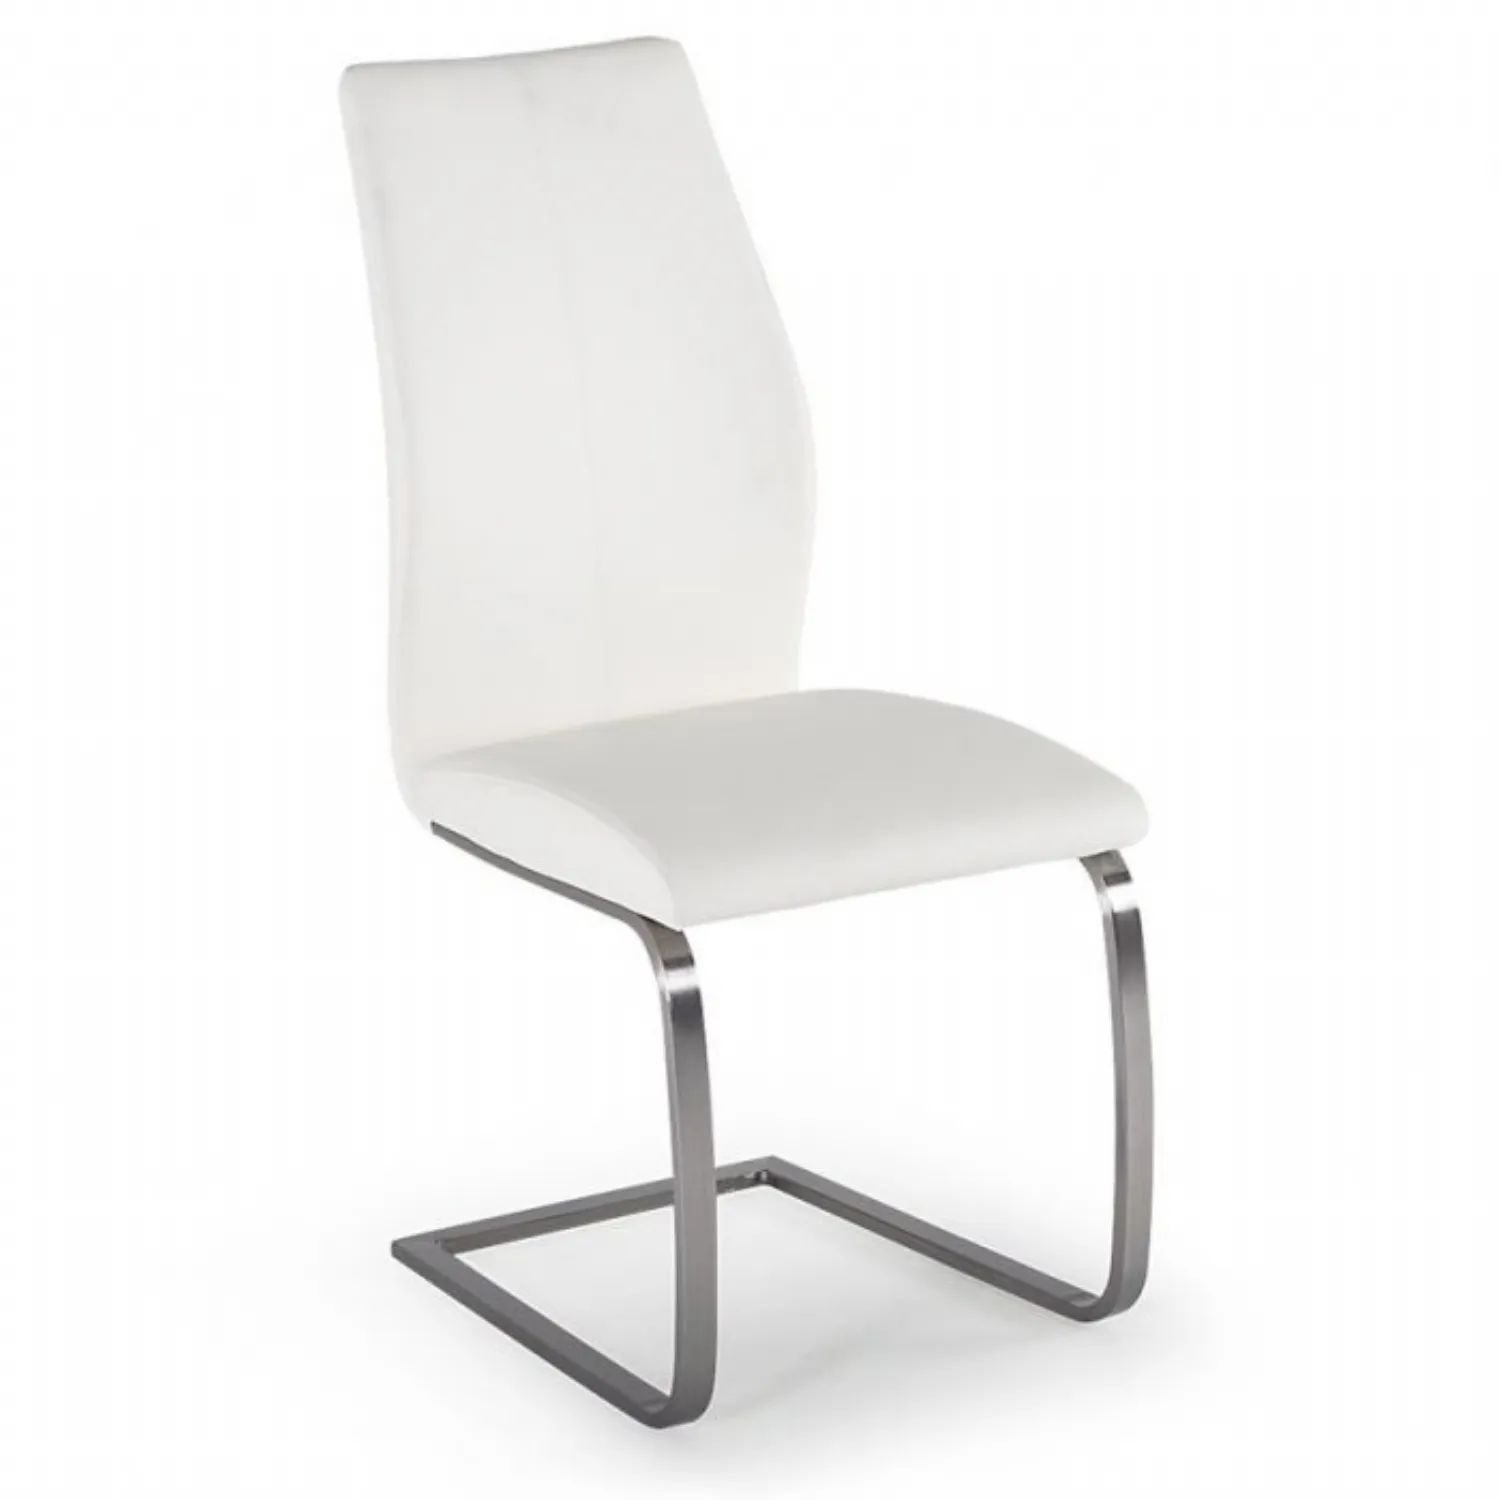 White Faux Leather Dining Chair Brushed Steel Legs